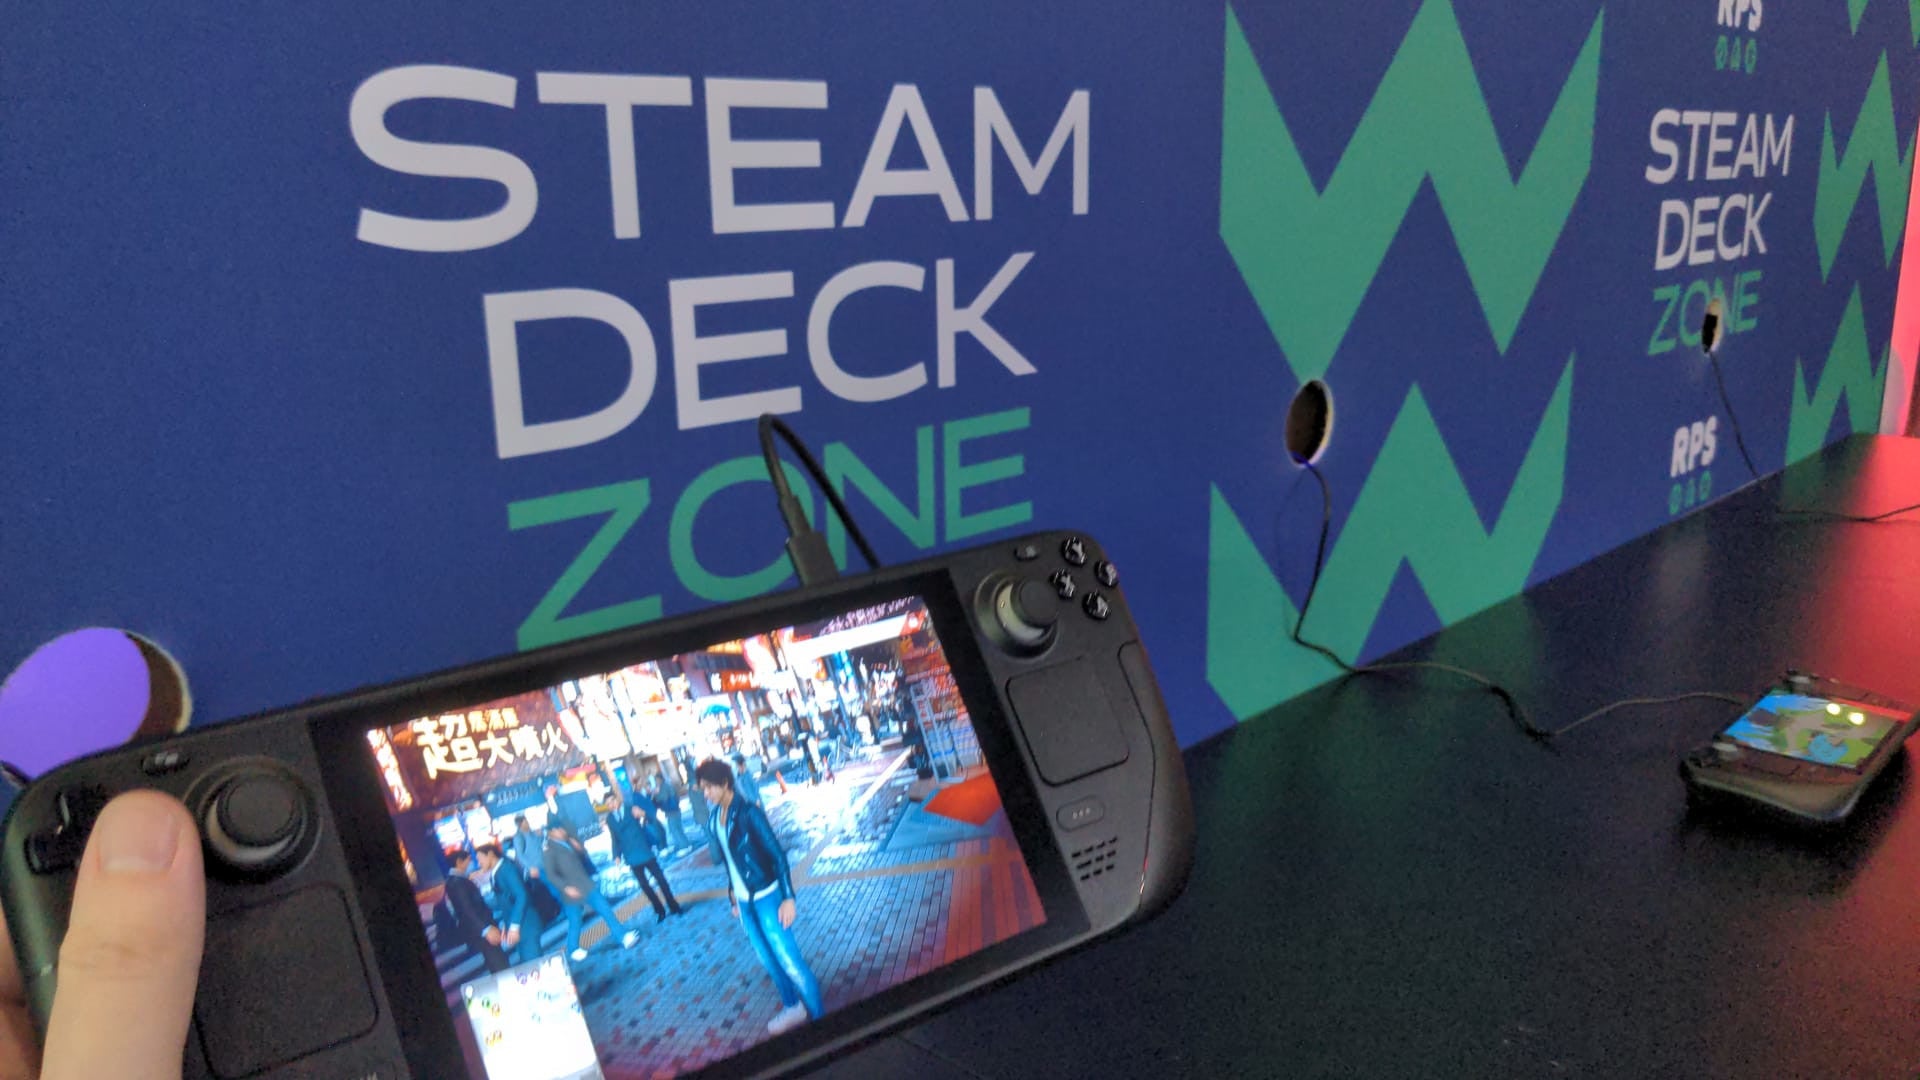 A photo from playing Judgment on the Steam Deck in the Steam Deck Zone at EGX 2022.